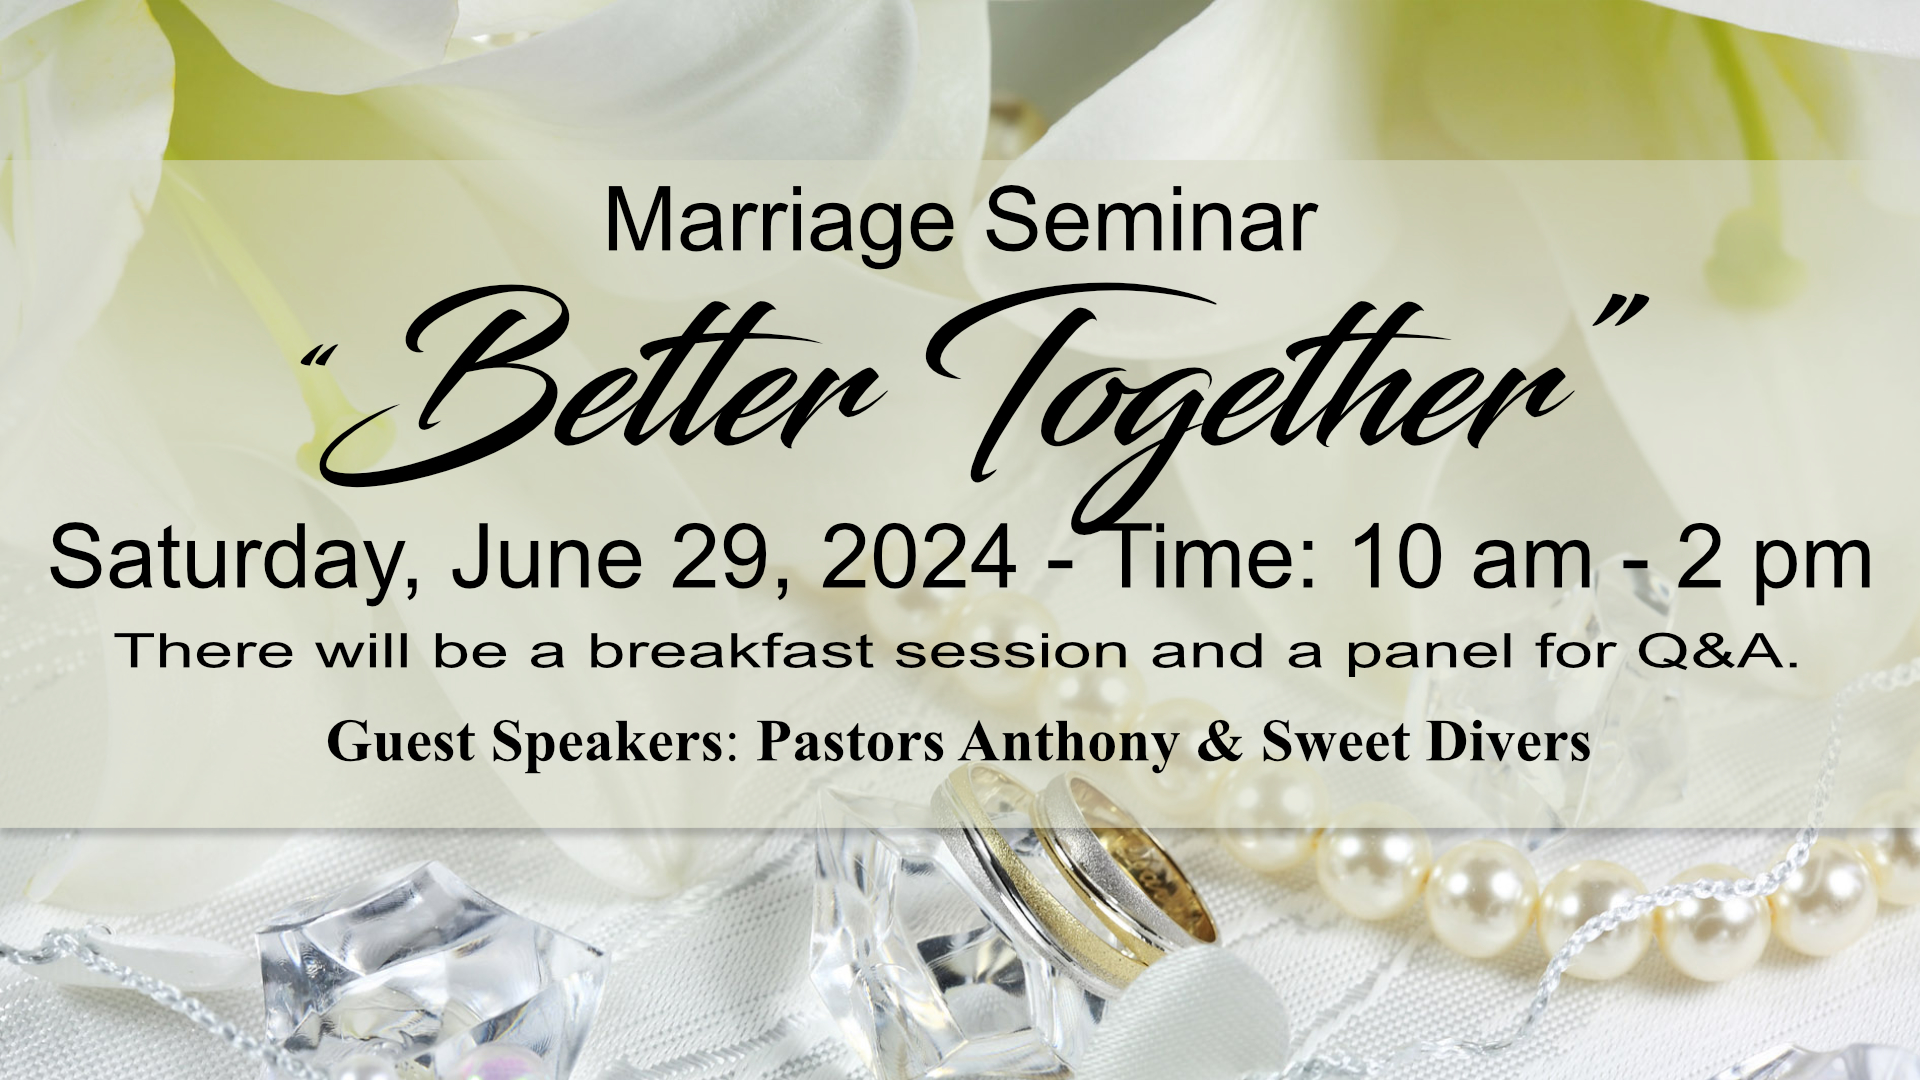 Married Couples Seminar